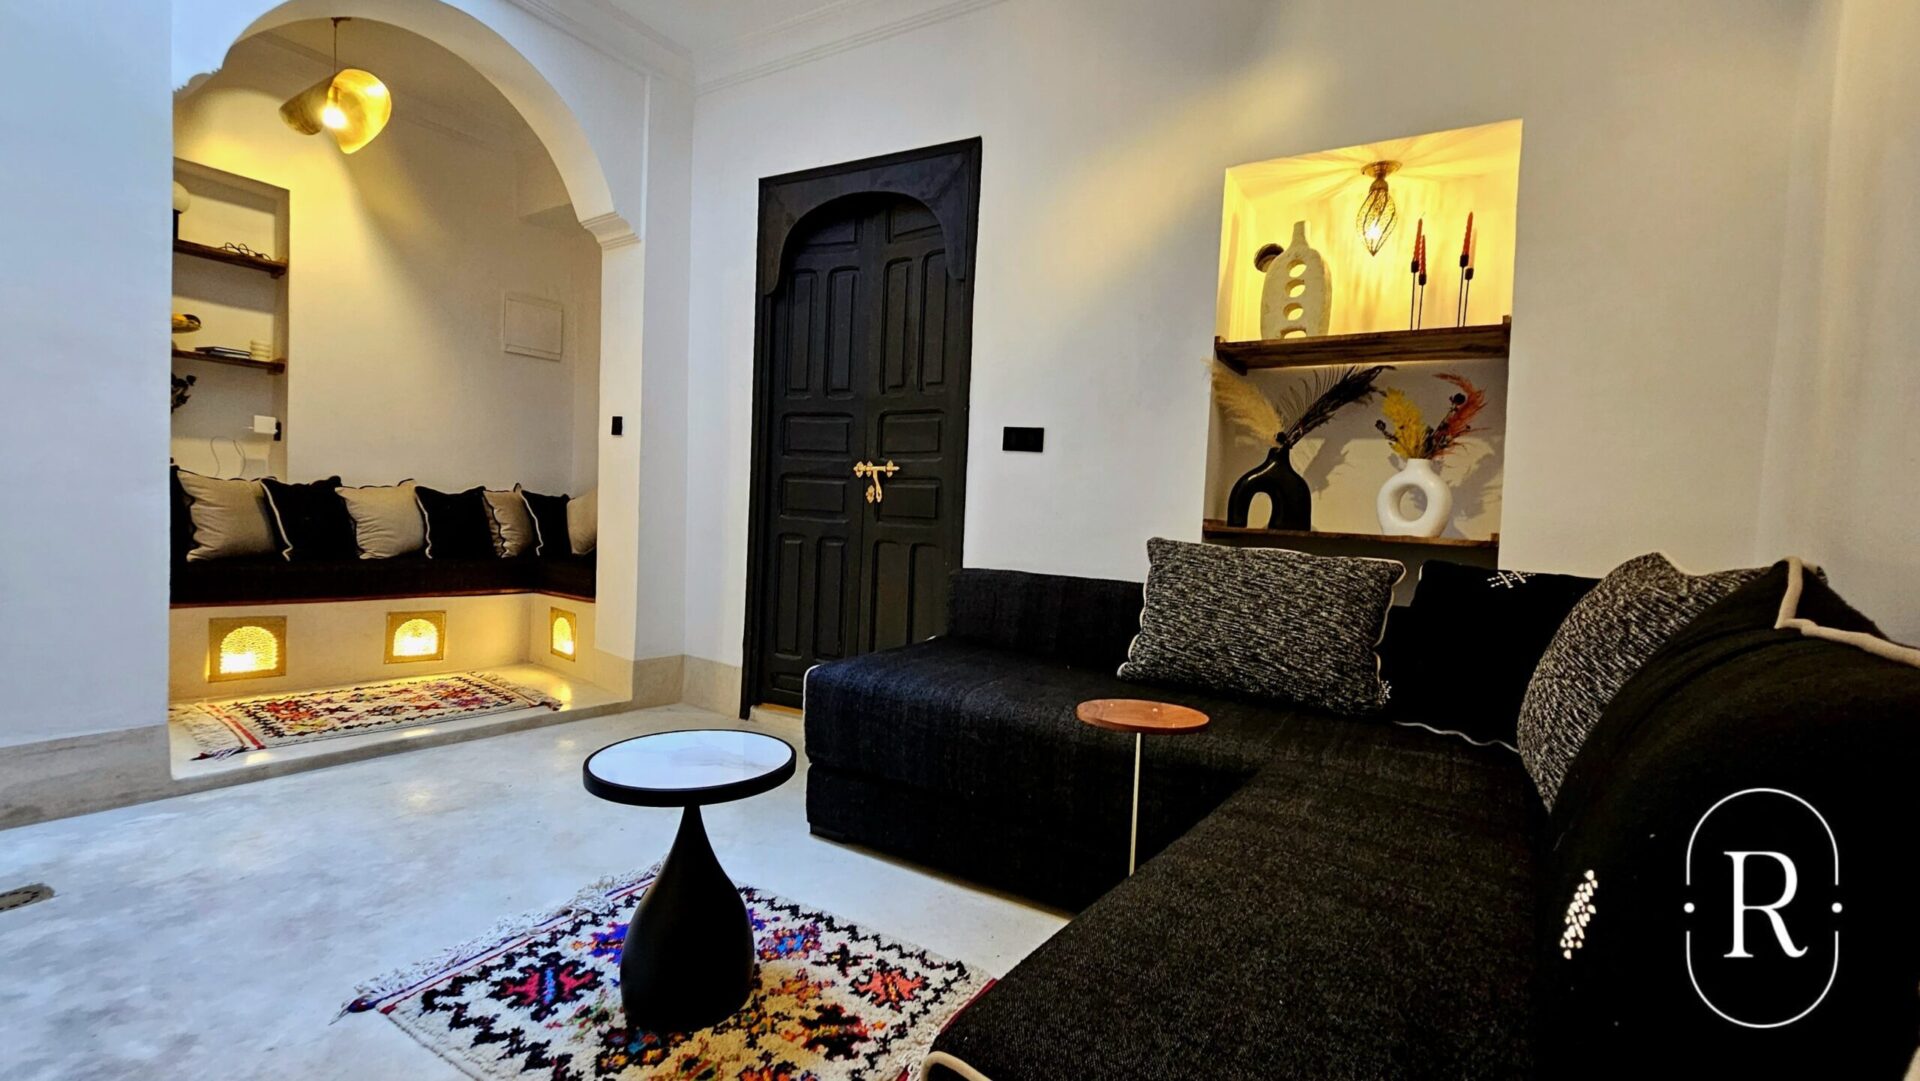 Berber carpet decorates the living room of a Riad in Marrakech